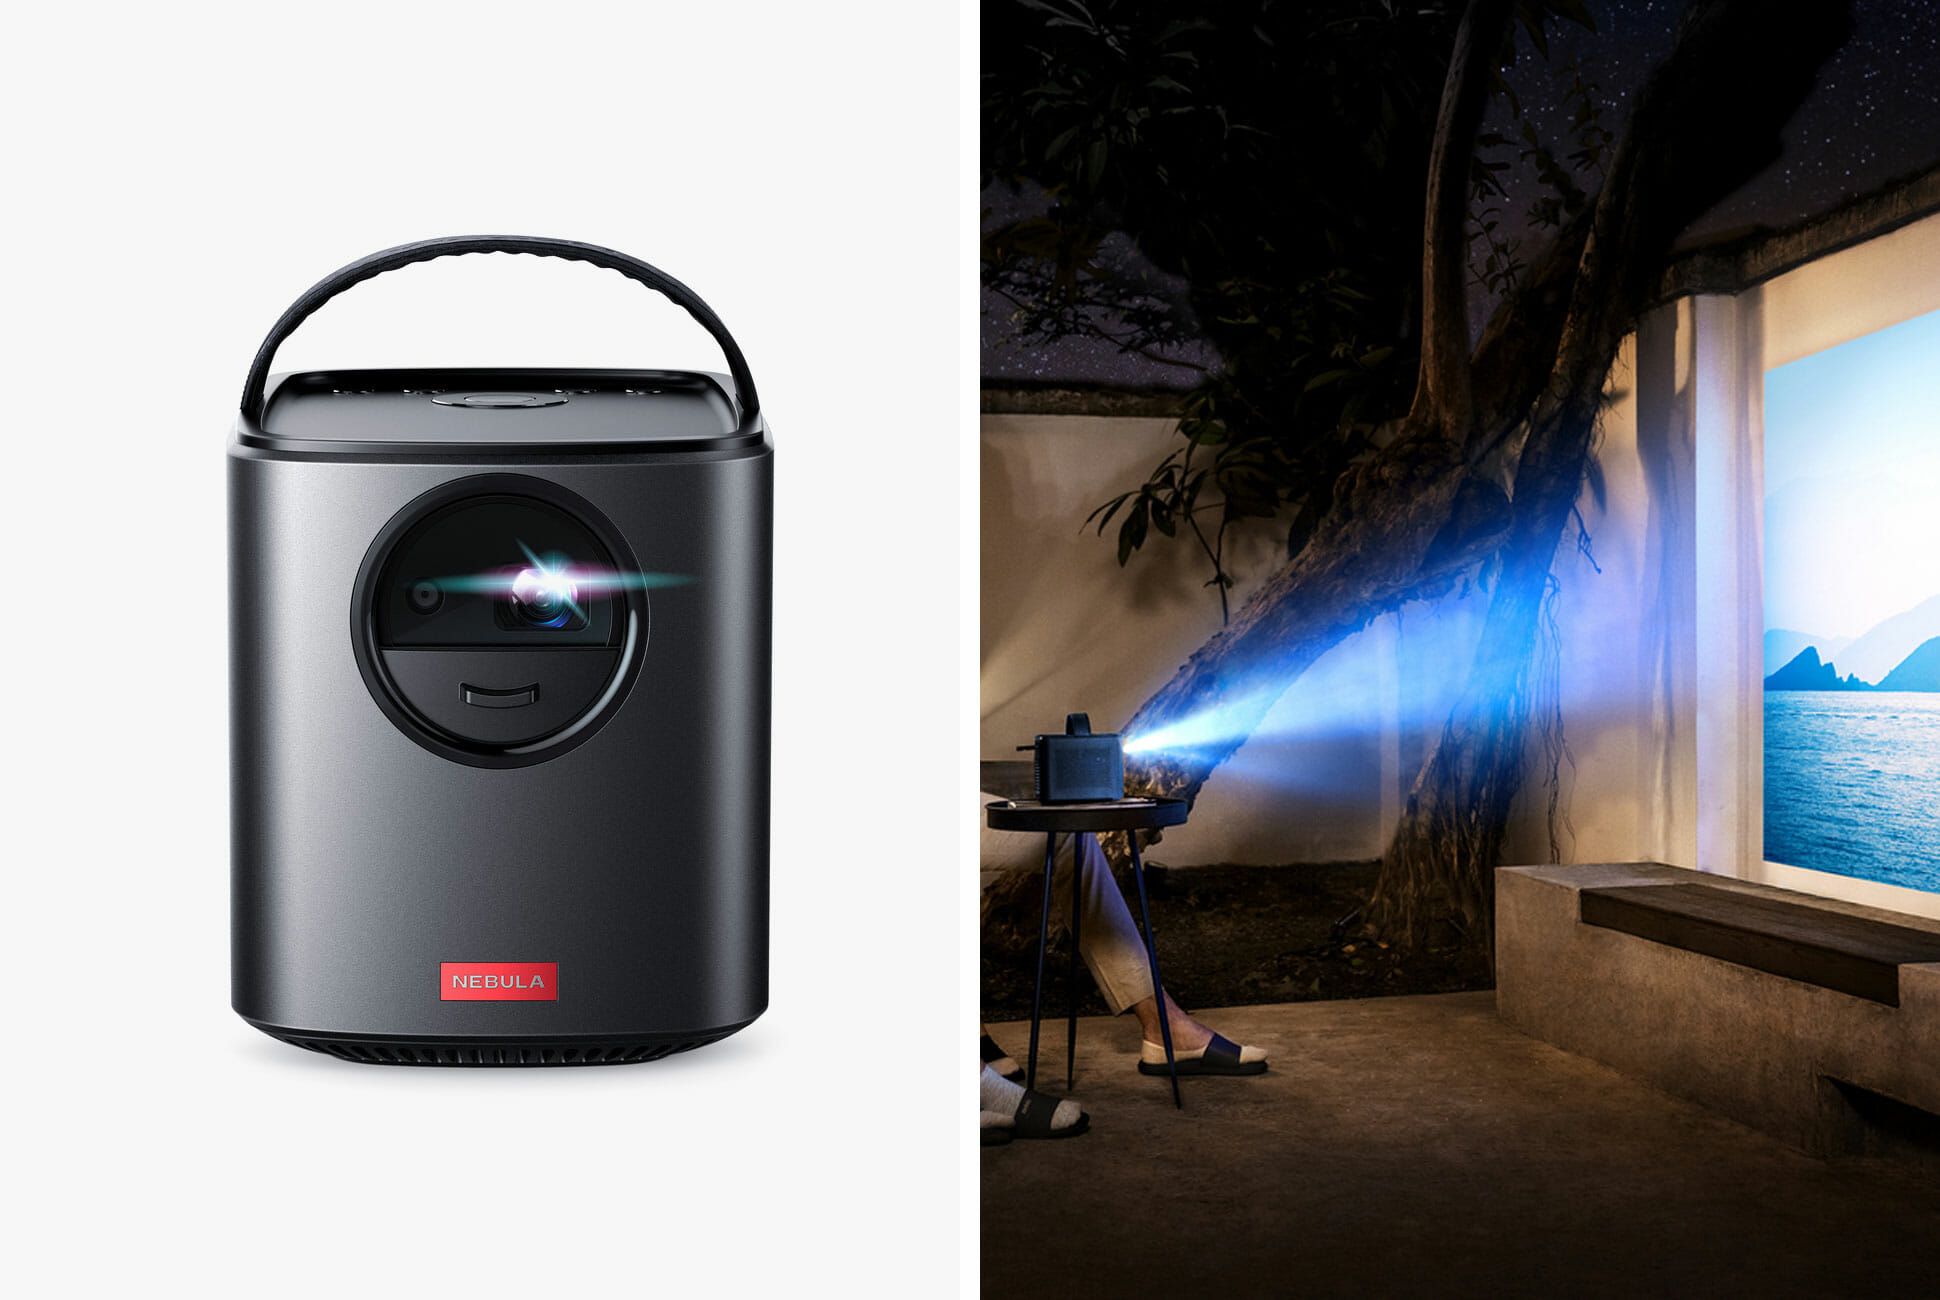 sarkom Stolthed dreng Review: Is this the Perfect Outdoor Projector?